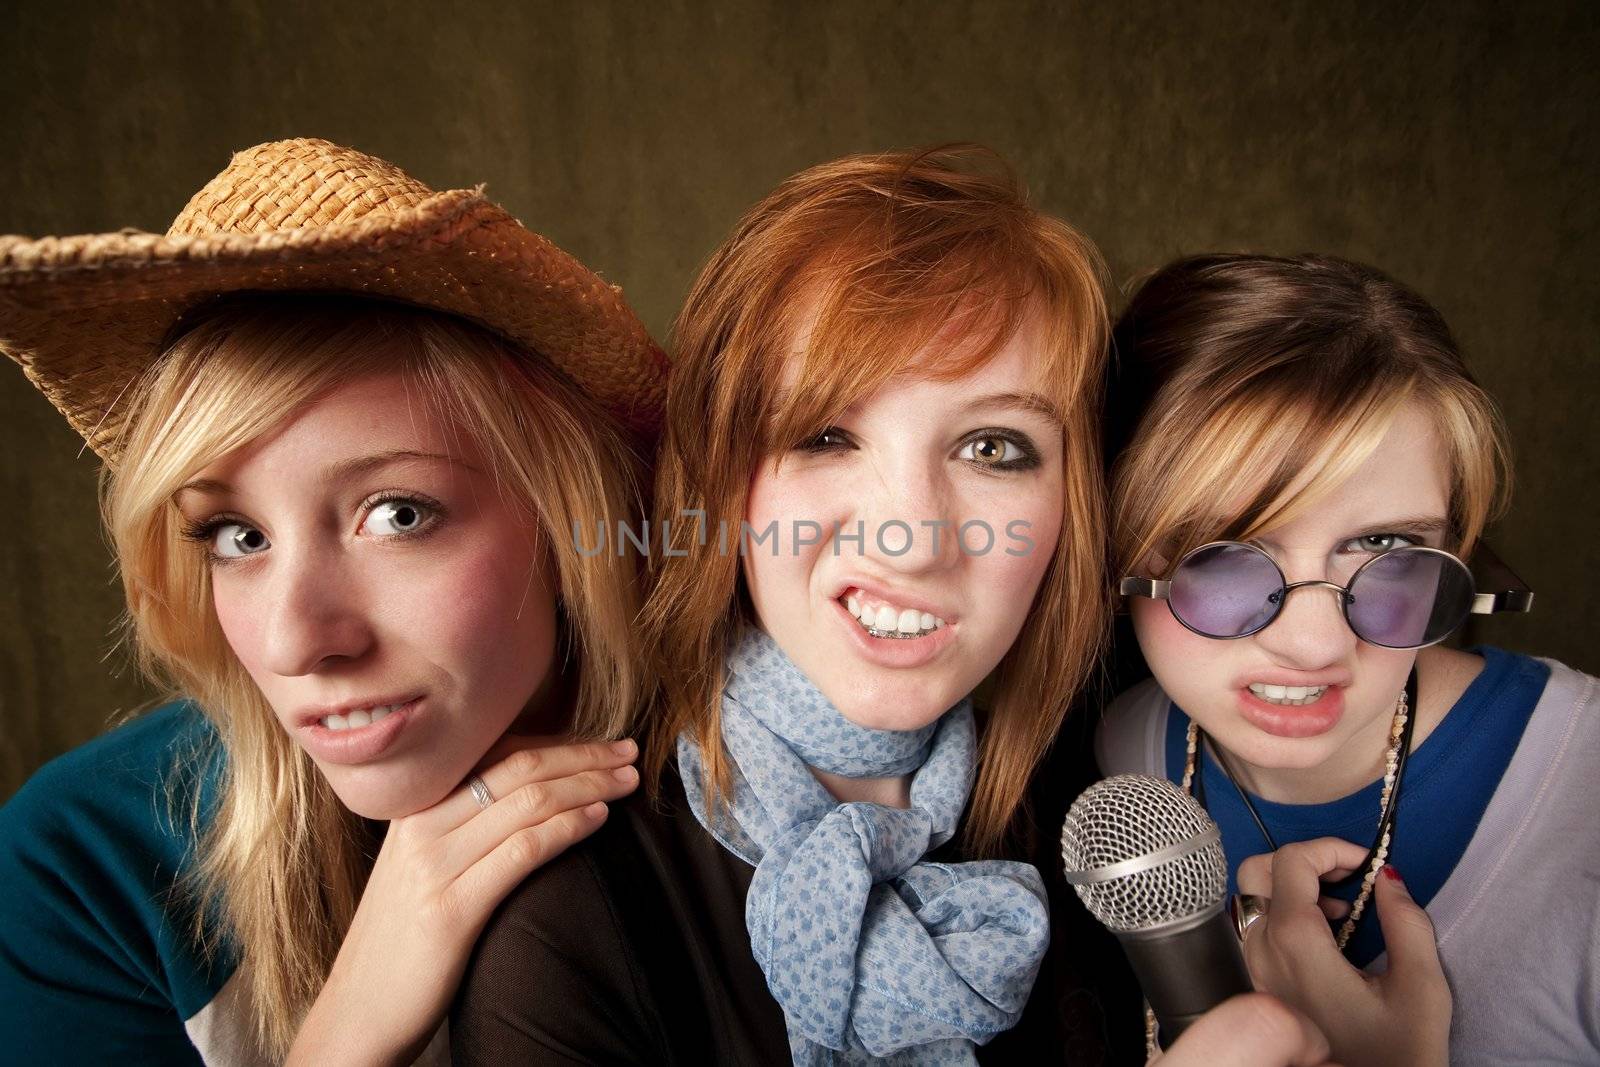 Three Young Girls with Microphone Making Faces by Creatista